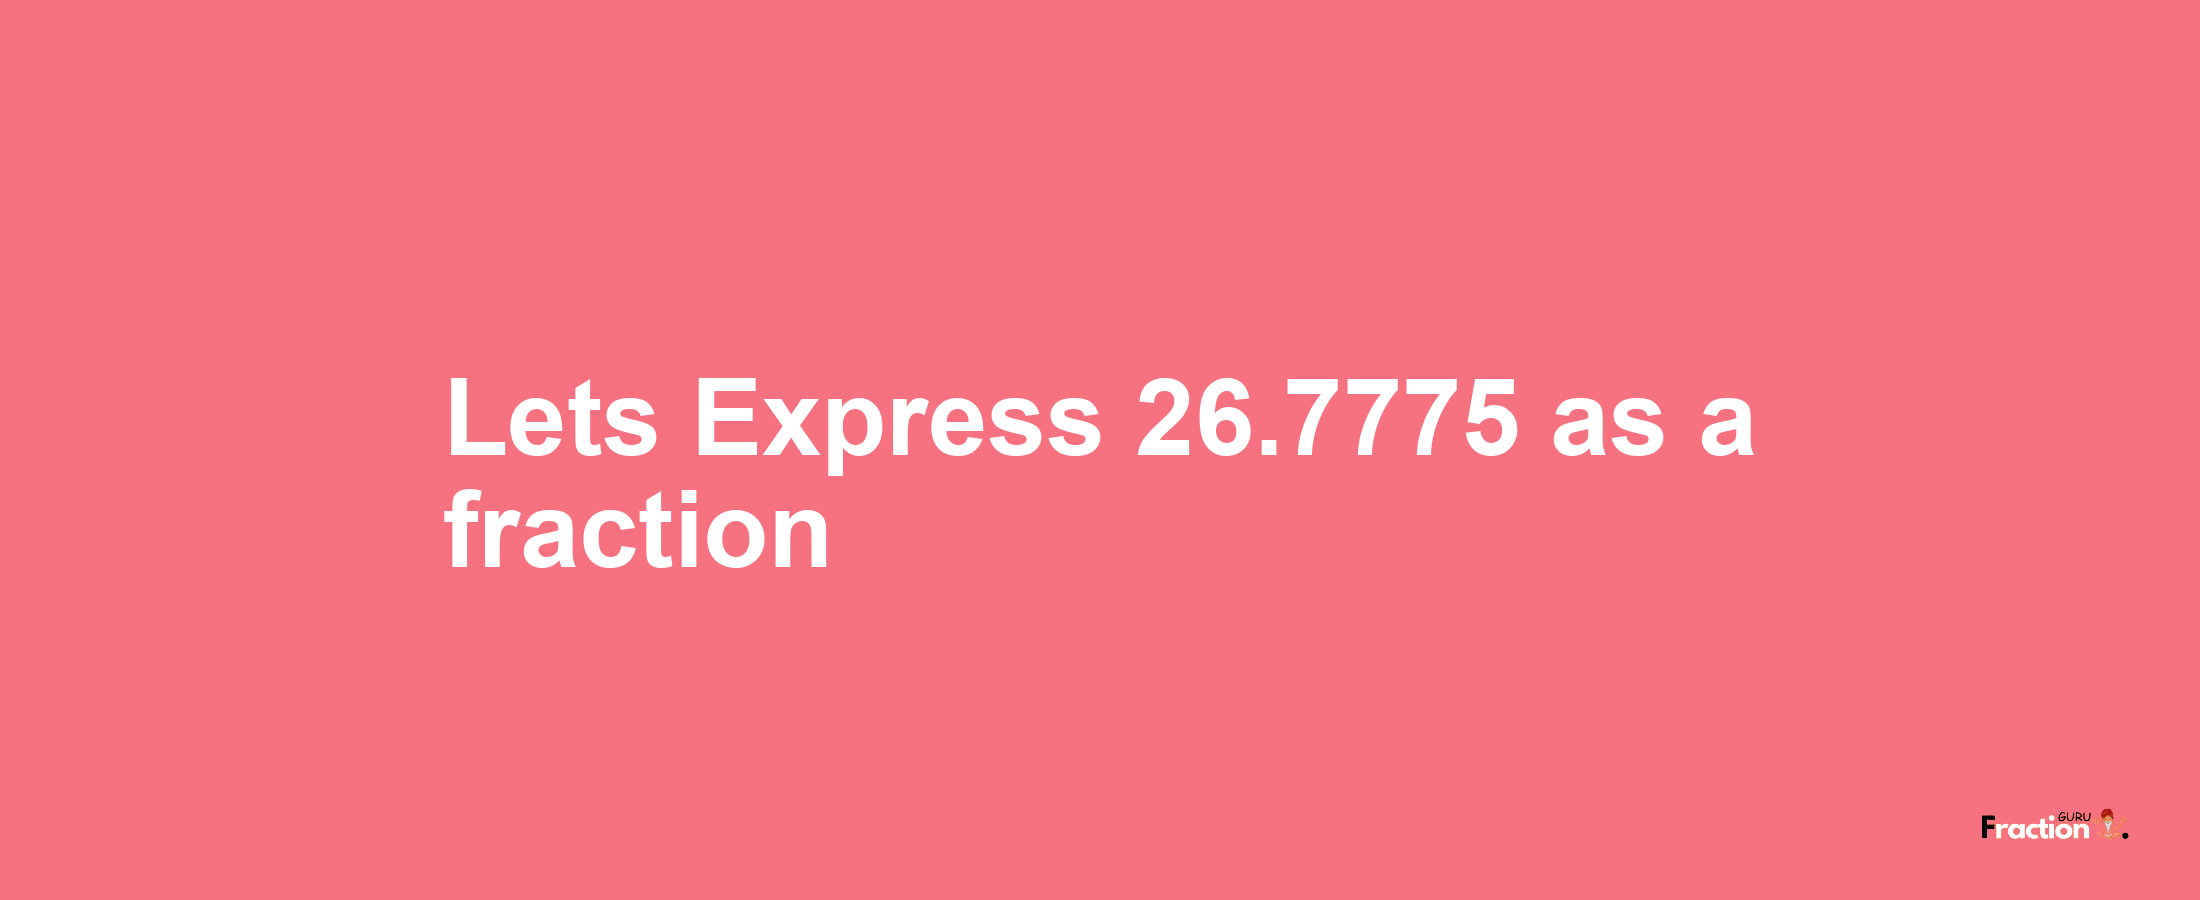 Lets Express 26.7775 as afraction